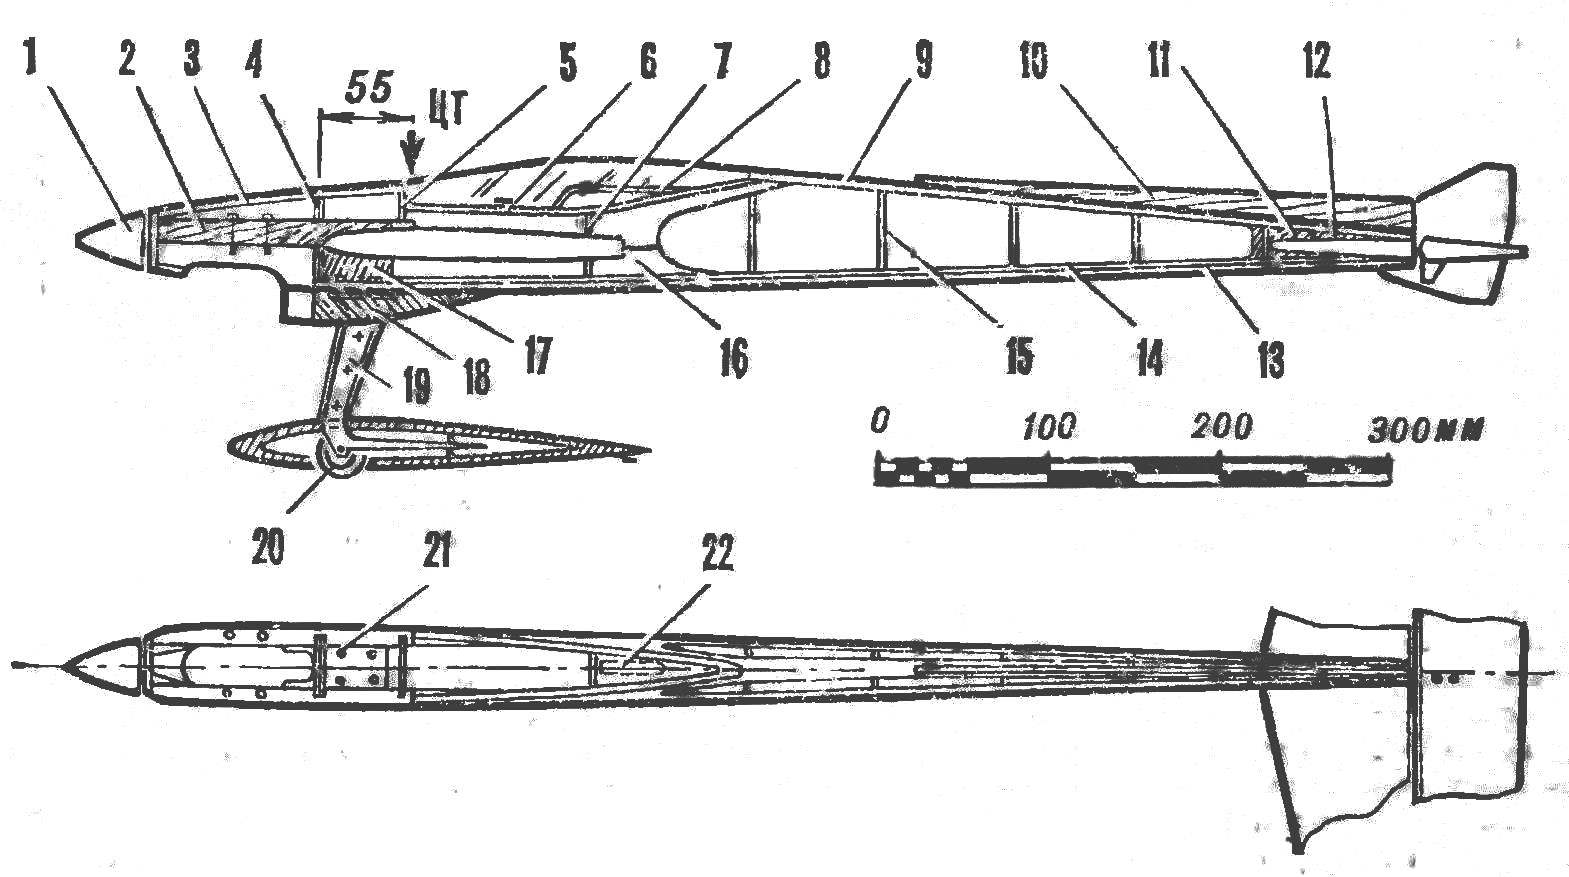 Fig. 4. The fuselage